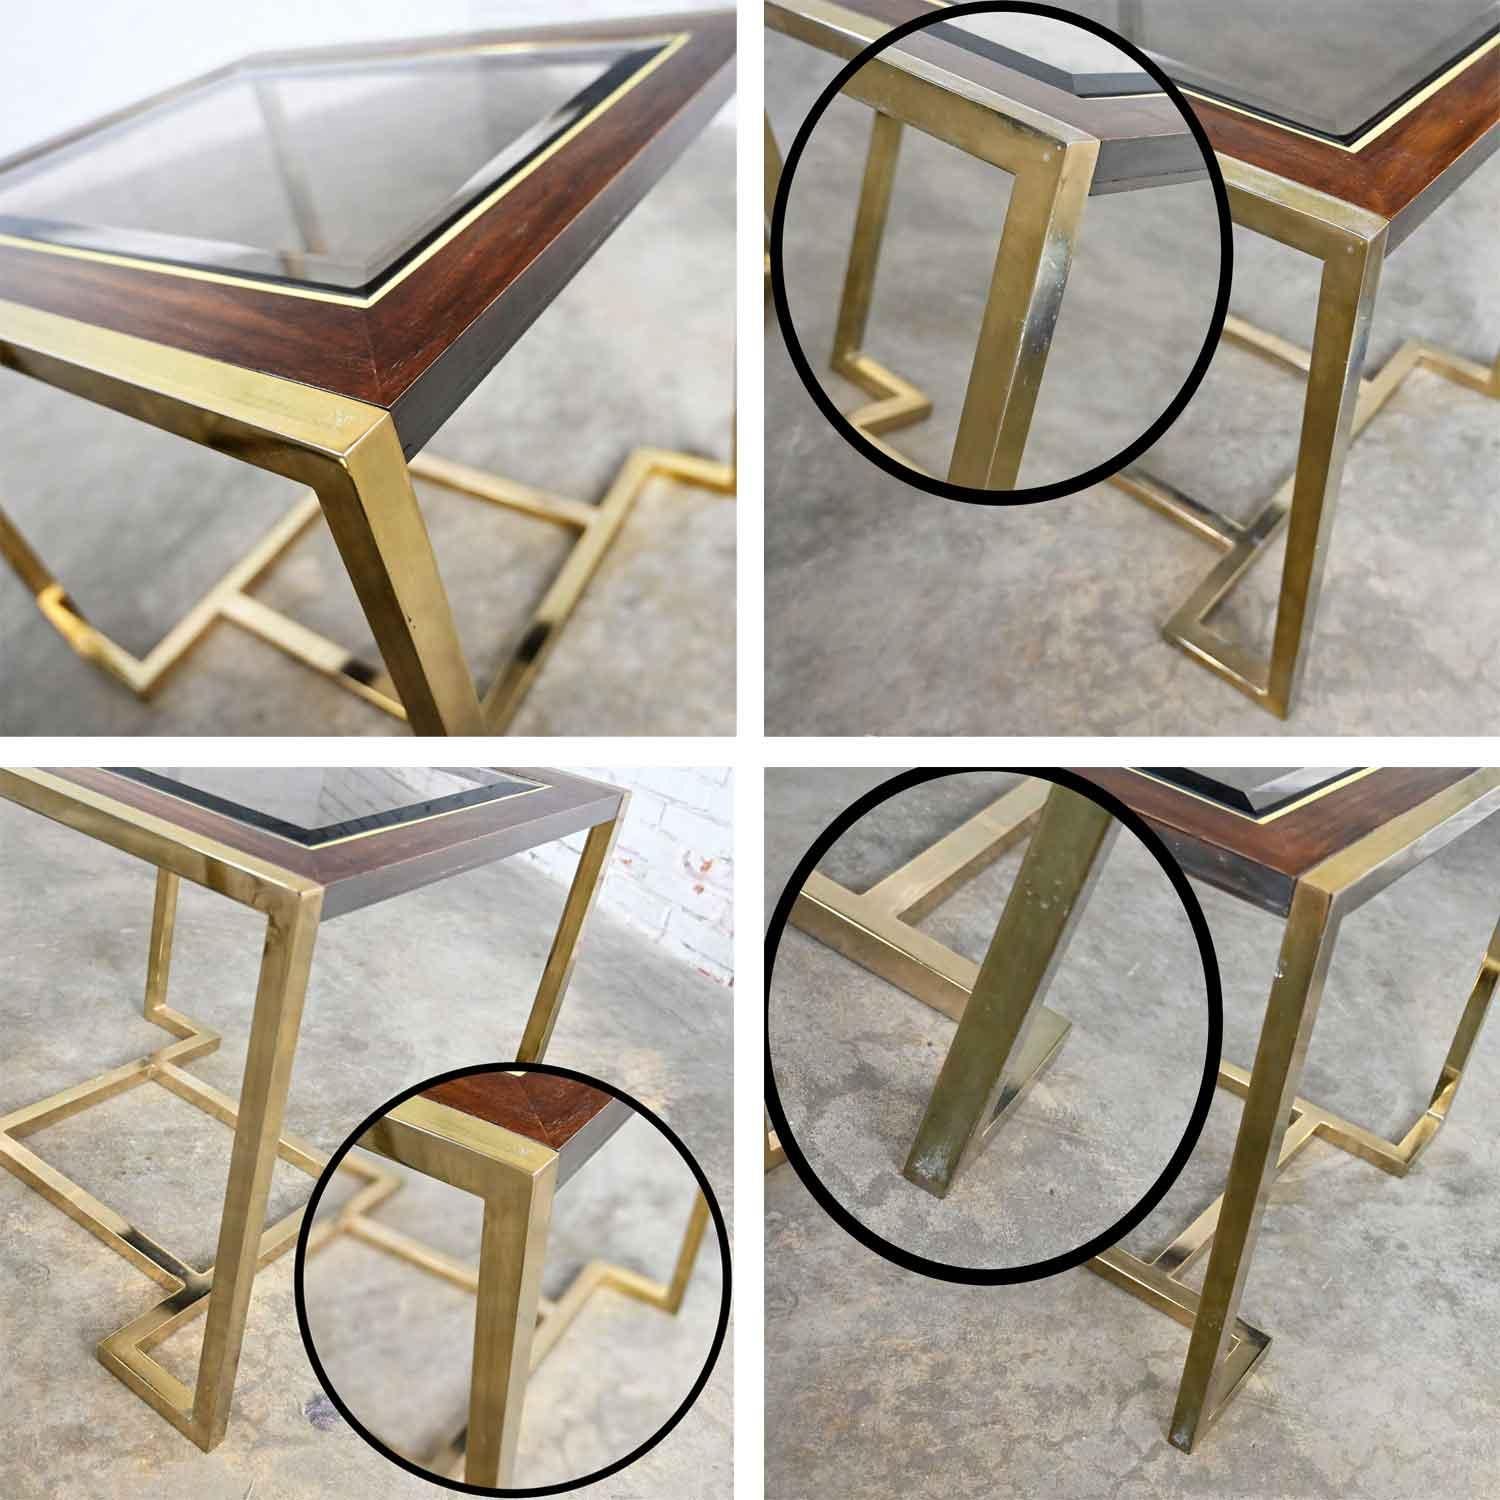 2 Brass Plated Wood & Glass End Tables by Thomasville Furn Style Milo Baughman For Sale 9